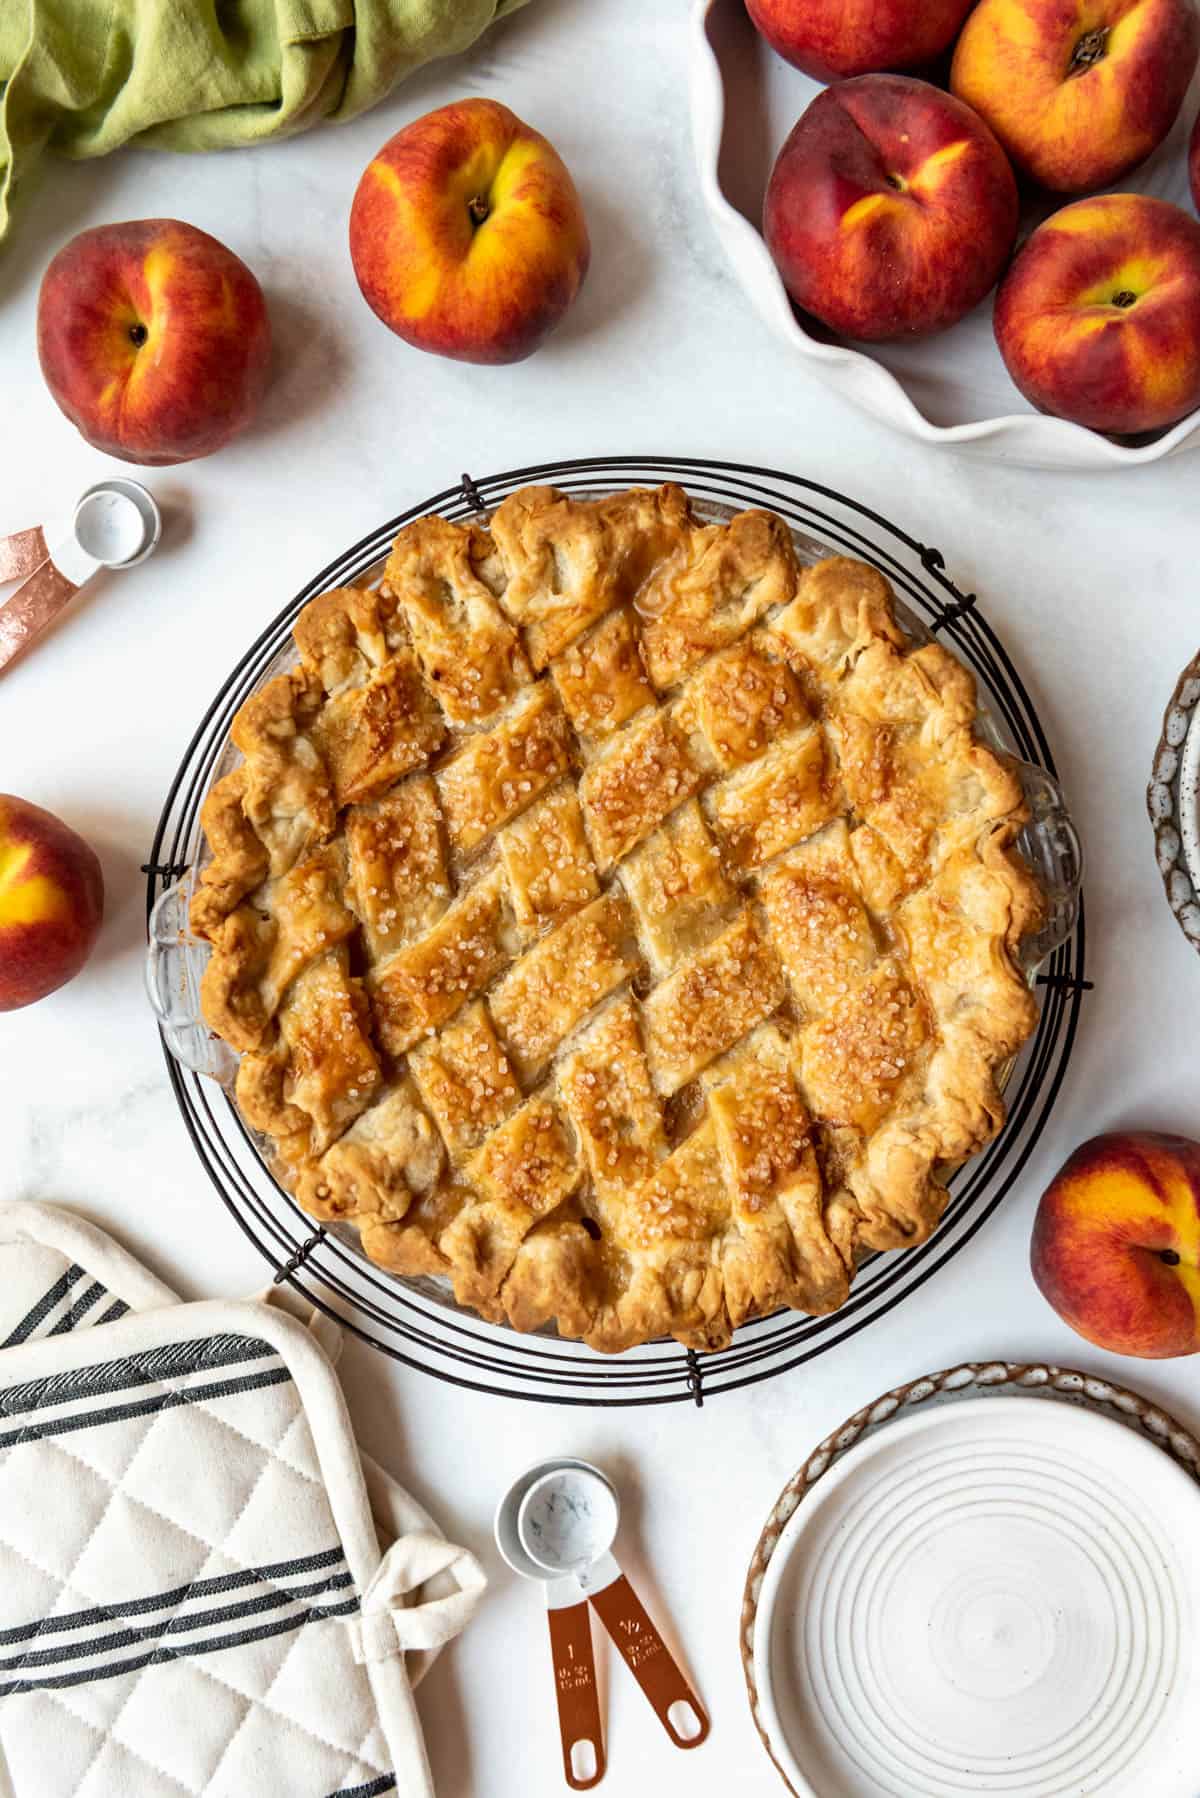 An overhead image of a baked peach pie with a lattice pie crust surrounded by fresh peaches.